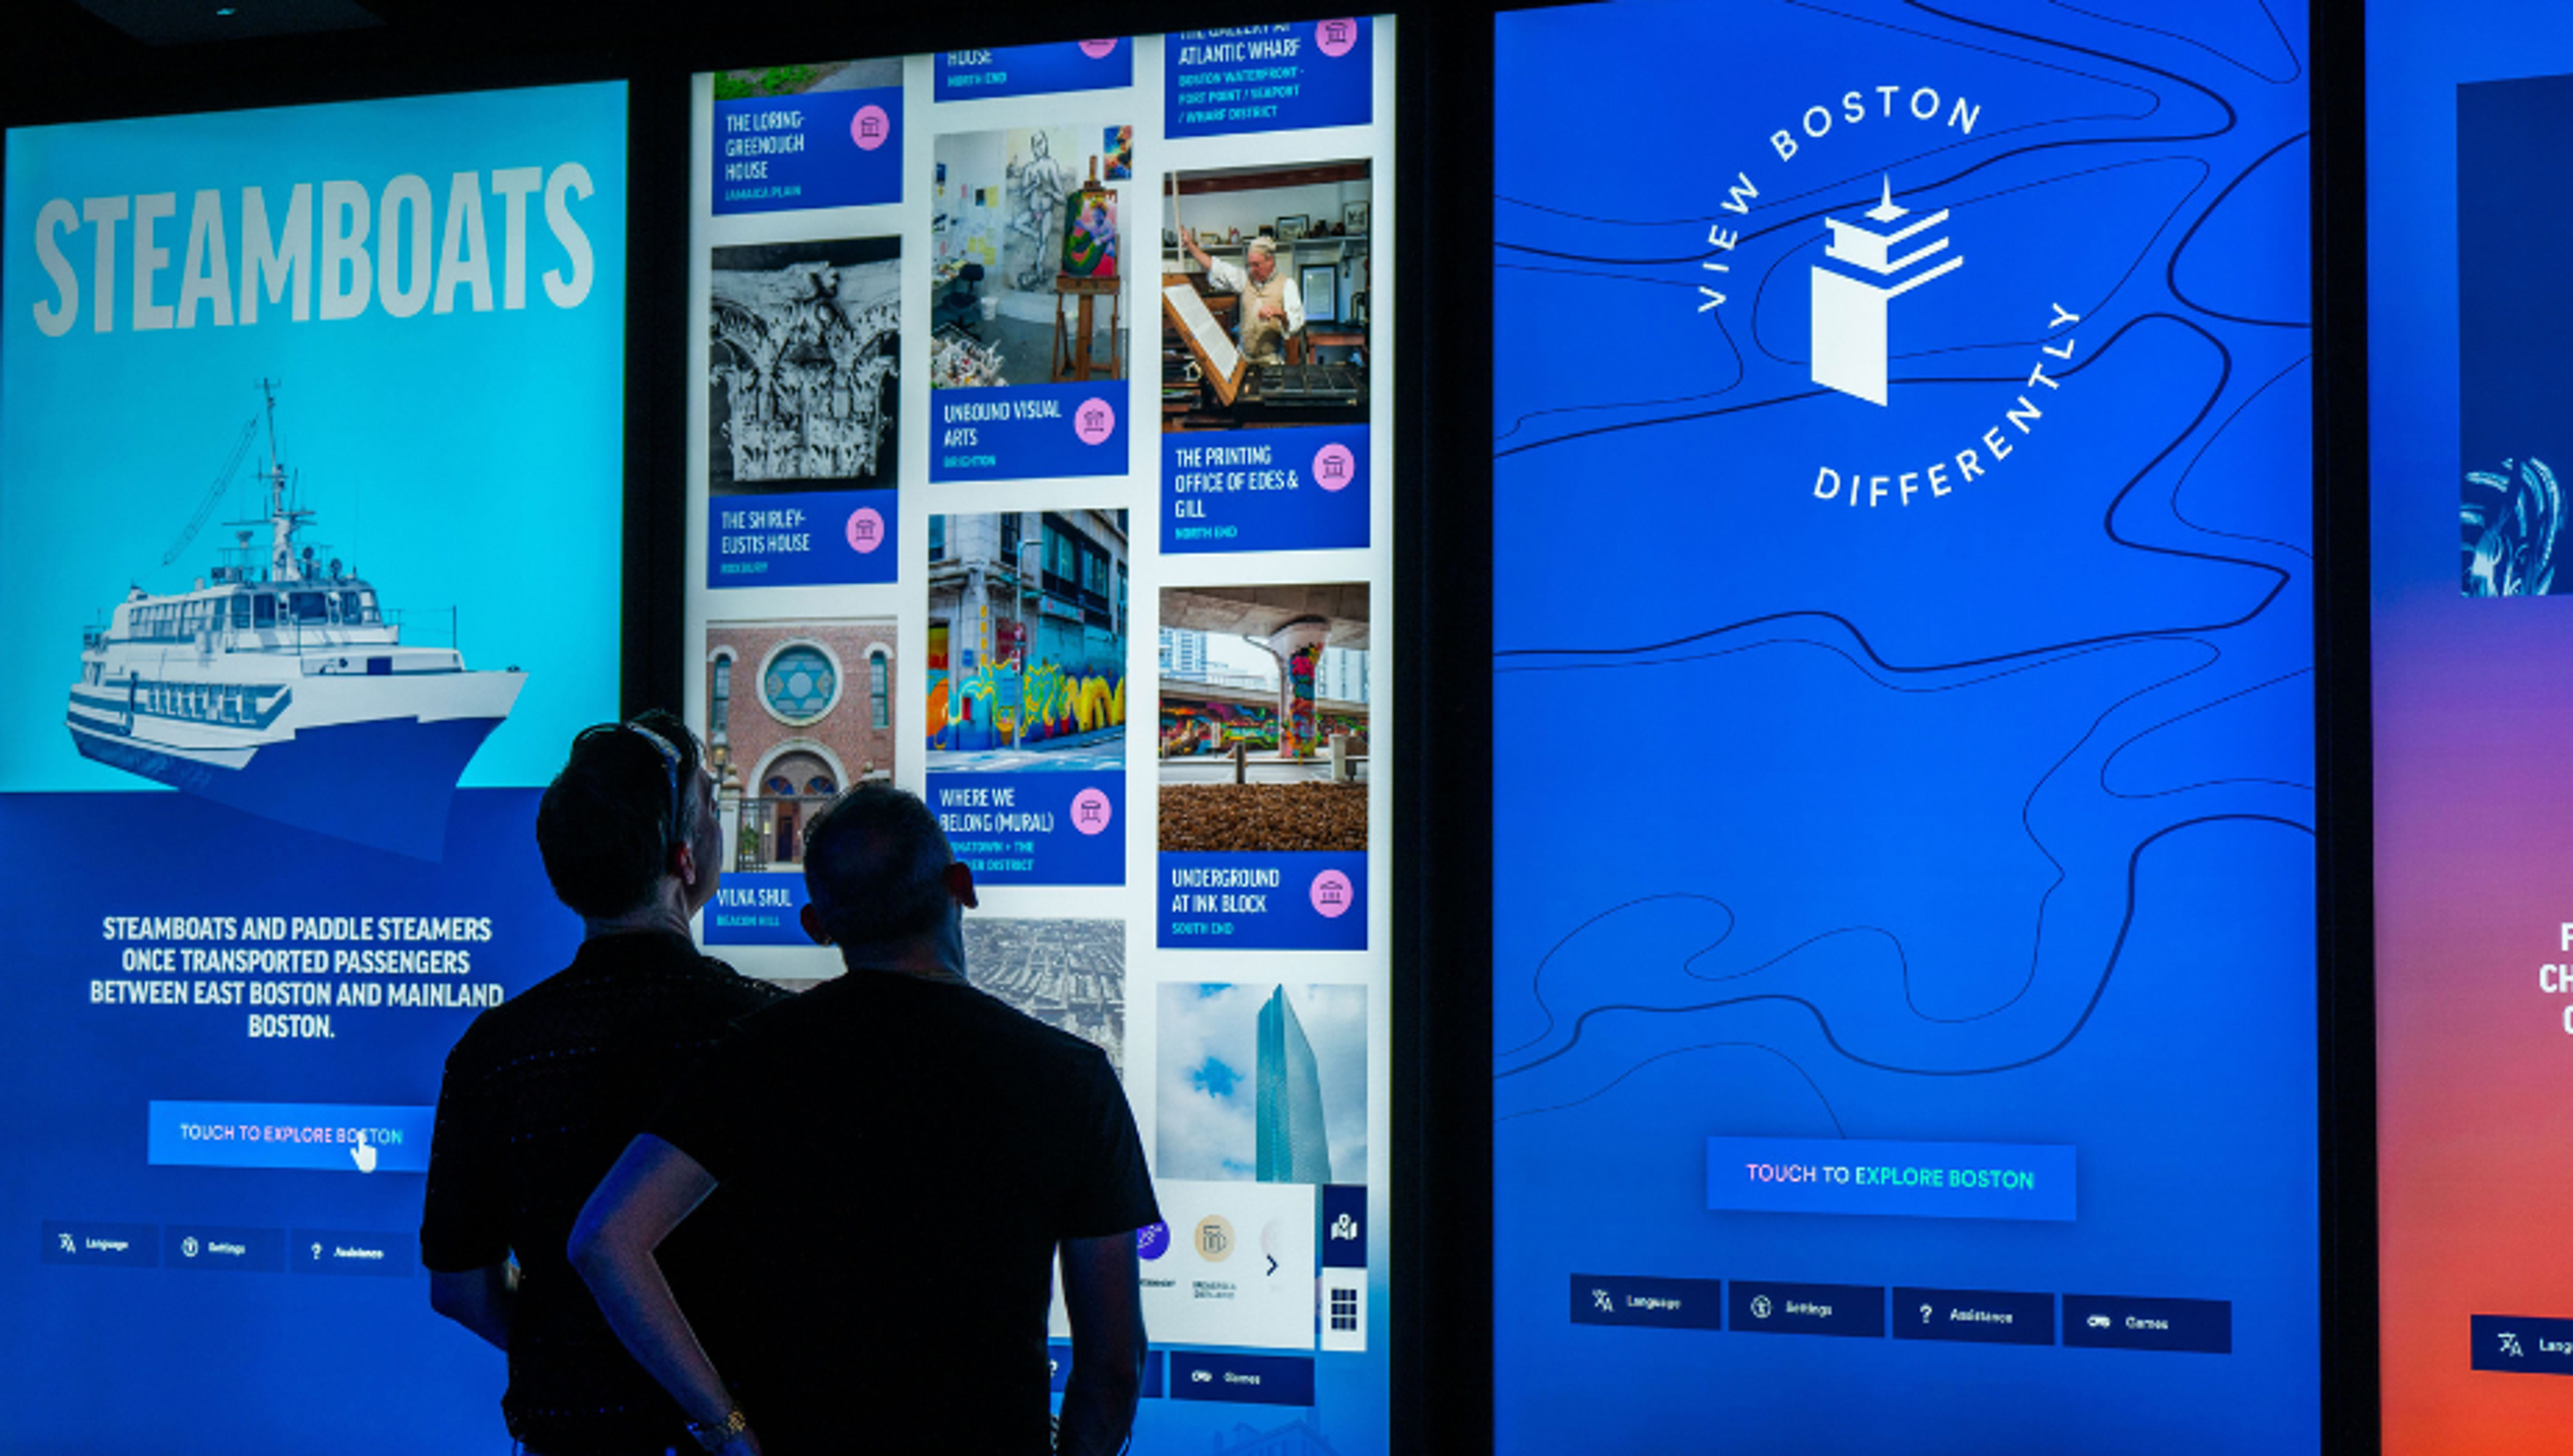 View Boston Named 2nd Best Observation Experience in the World